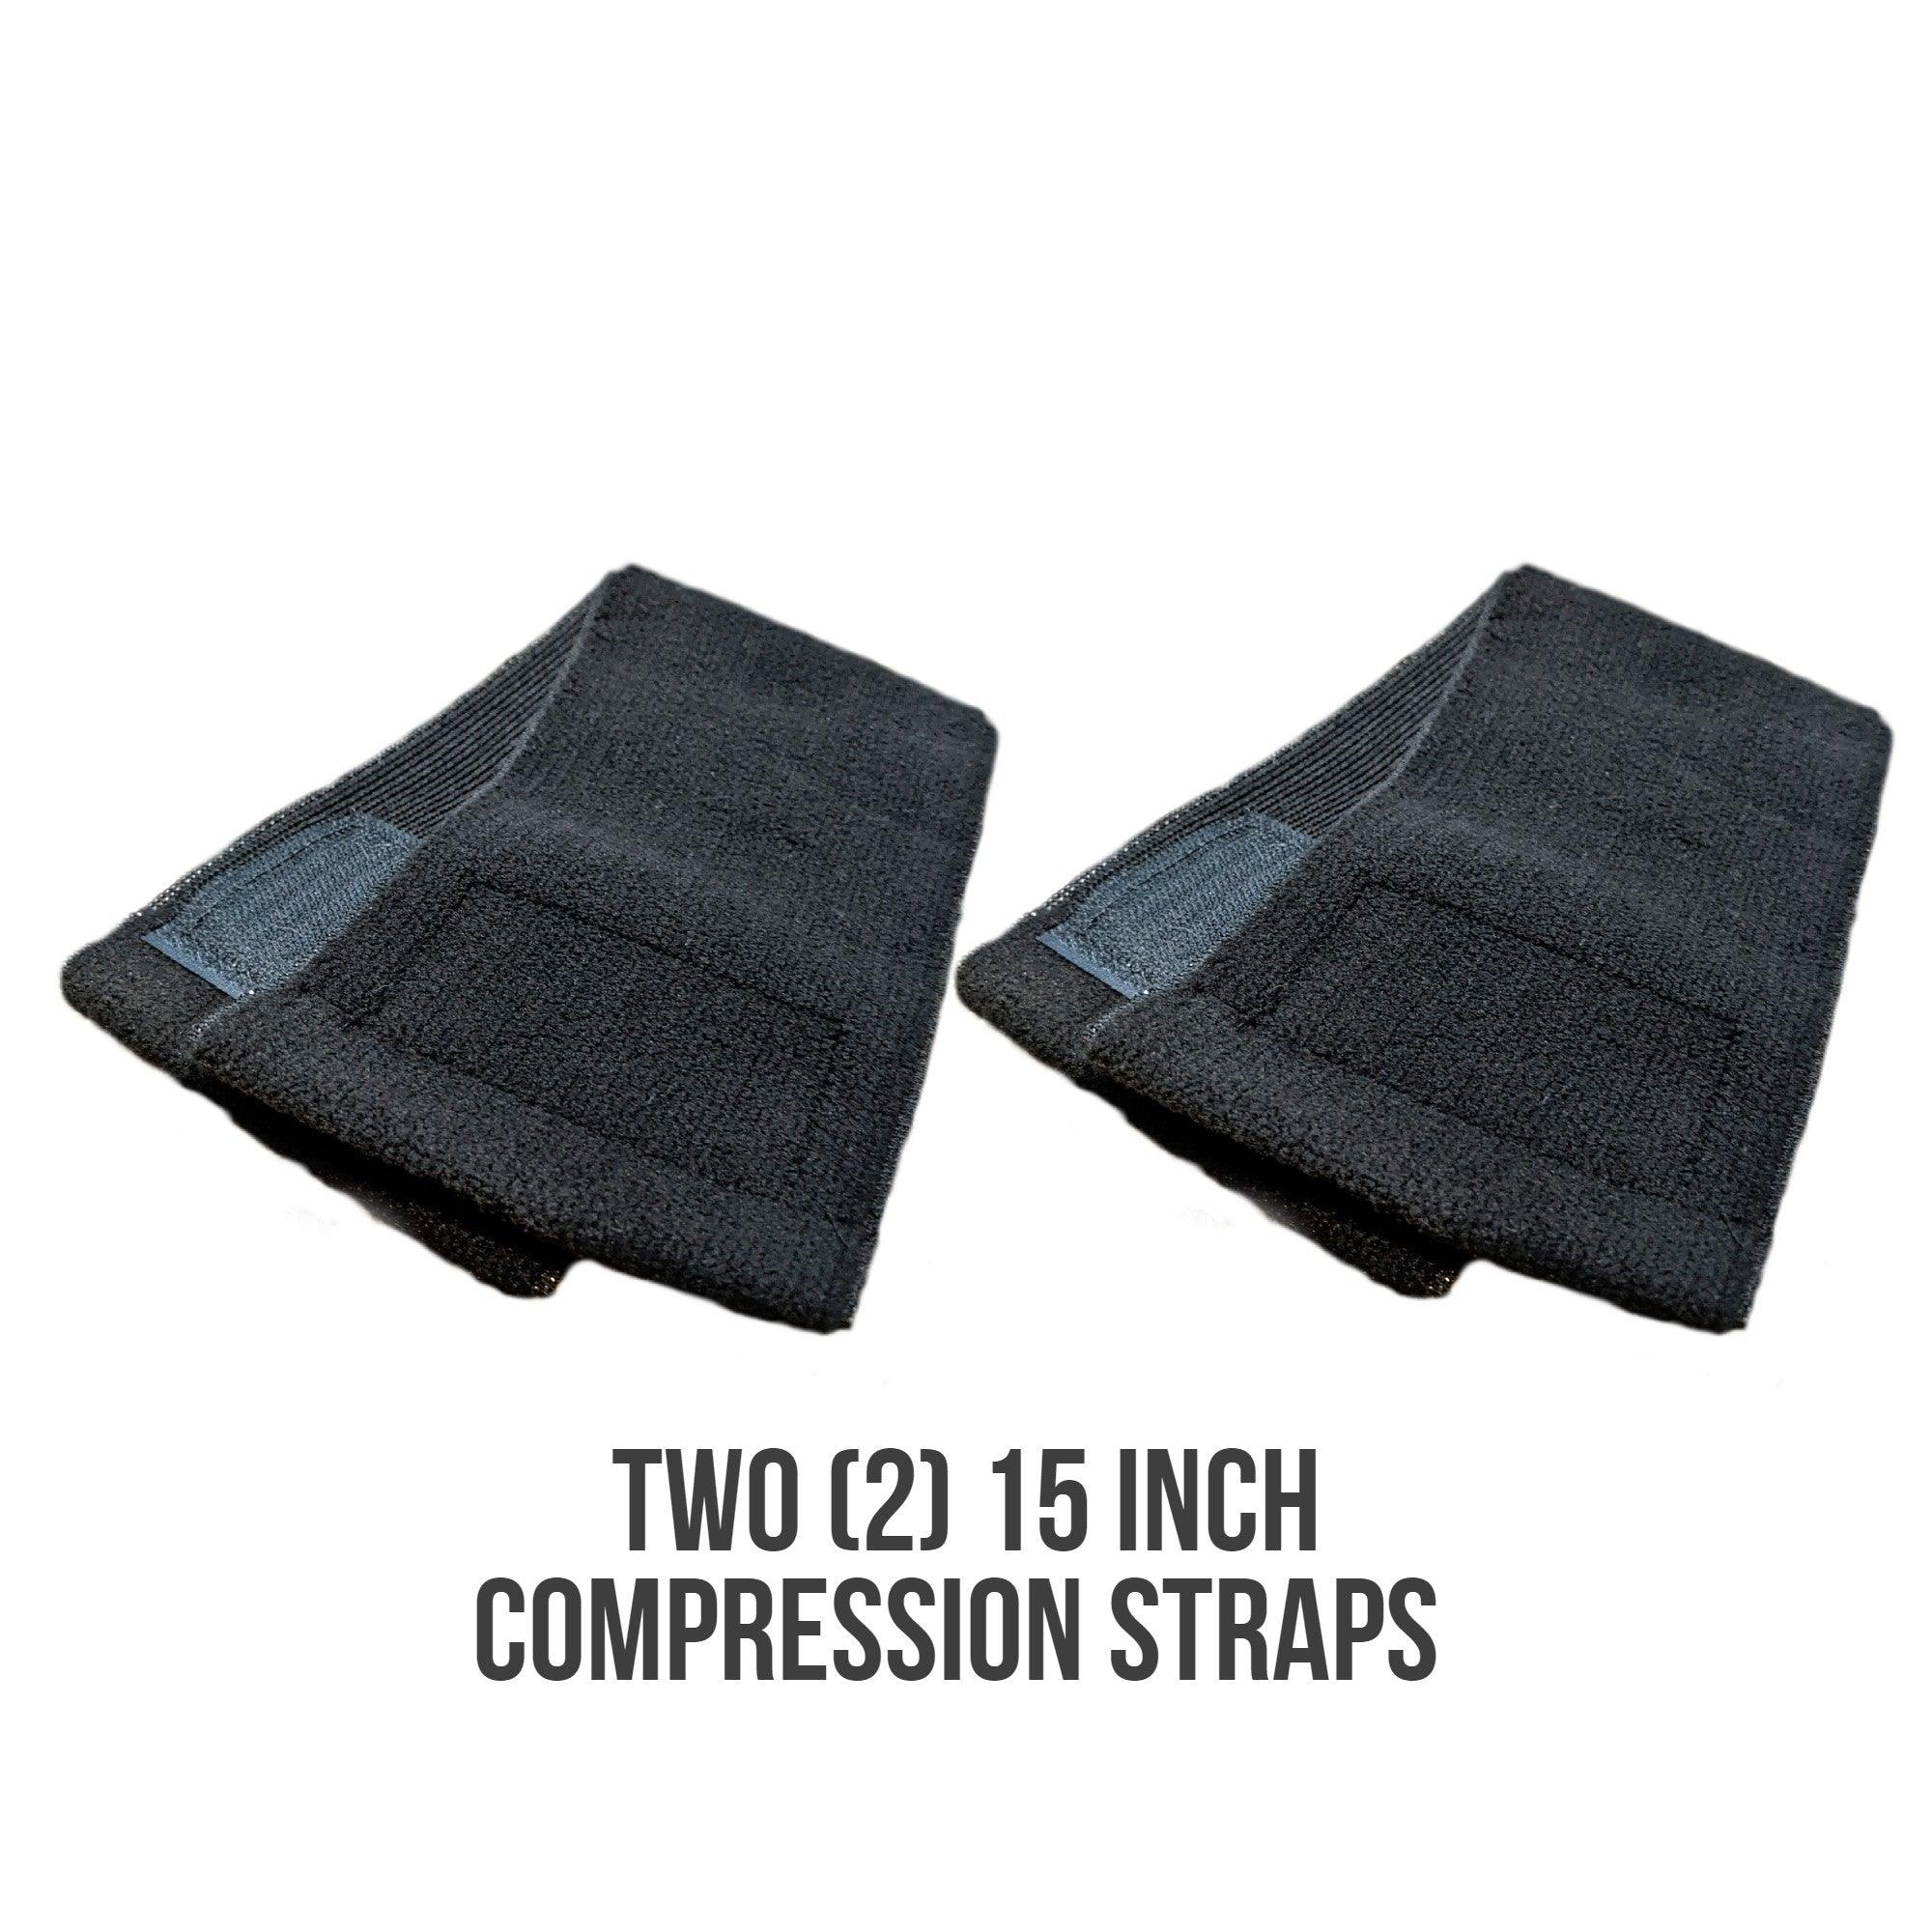 https://supplypt.com/cdn/shop/products/omni-ice-premium-cold-therapy-compression-straps-cold-therapy-supply-physical-therapy-accessories-accessory-aircast-accessories-best-seller-breg-breg-accessories-breg-wave-accessories-classic3-accesso-30262295625982.jpg?v=1697479409